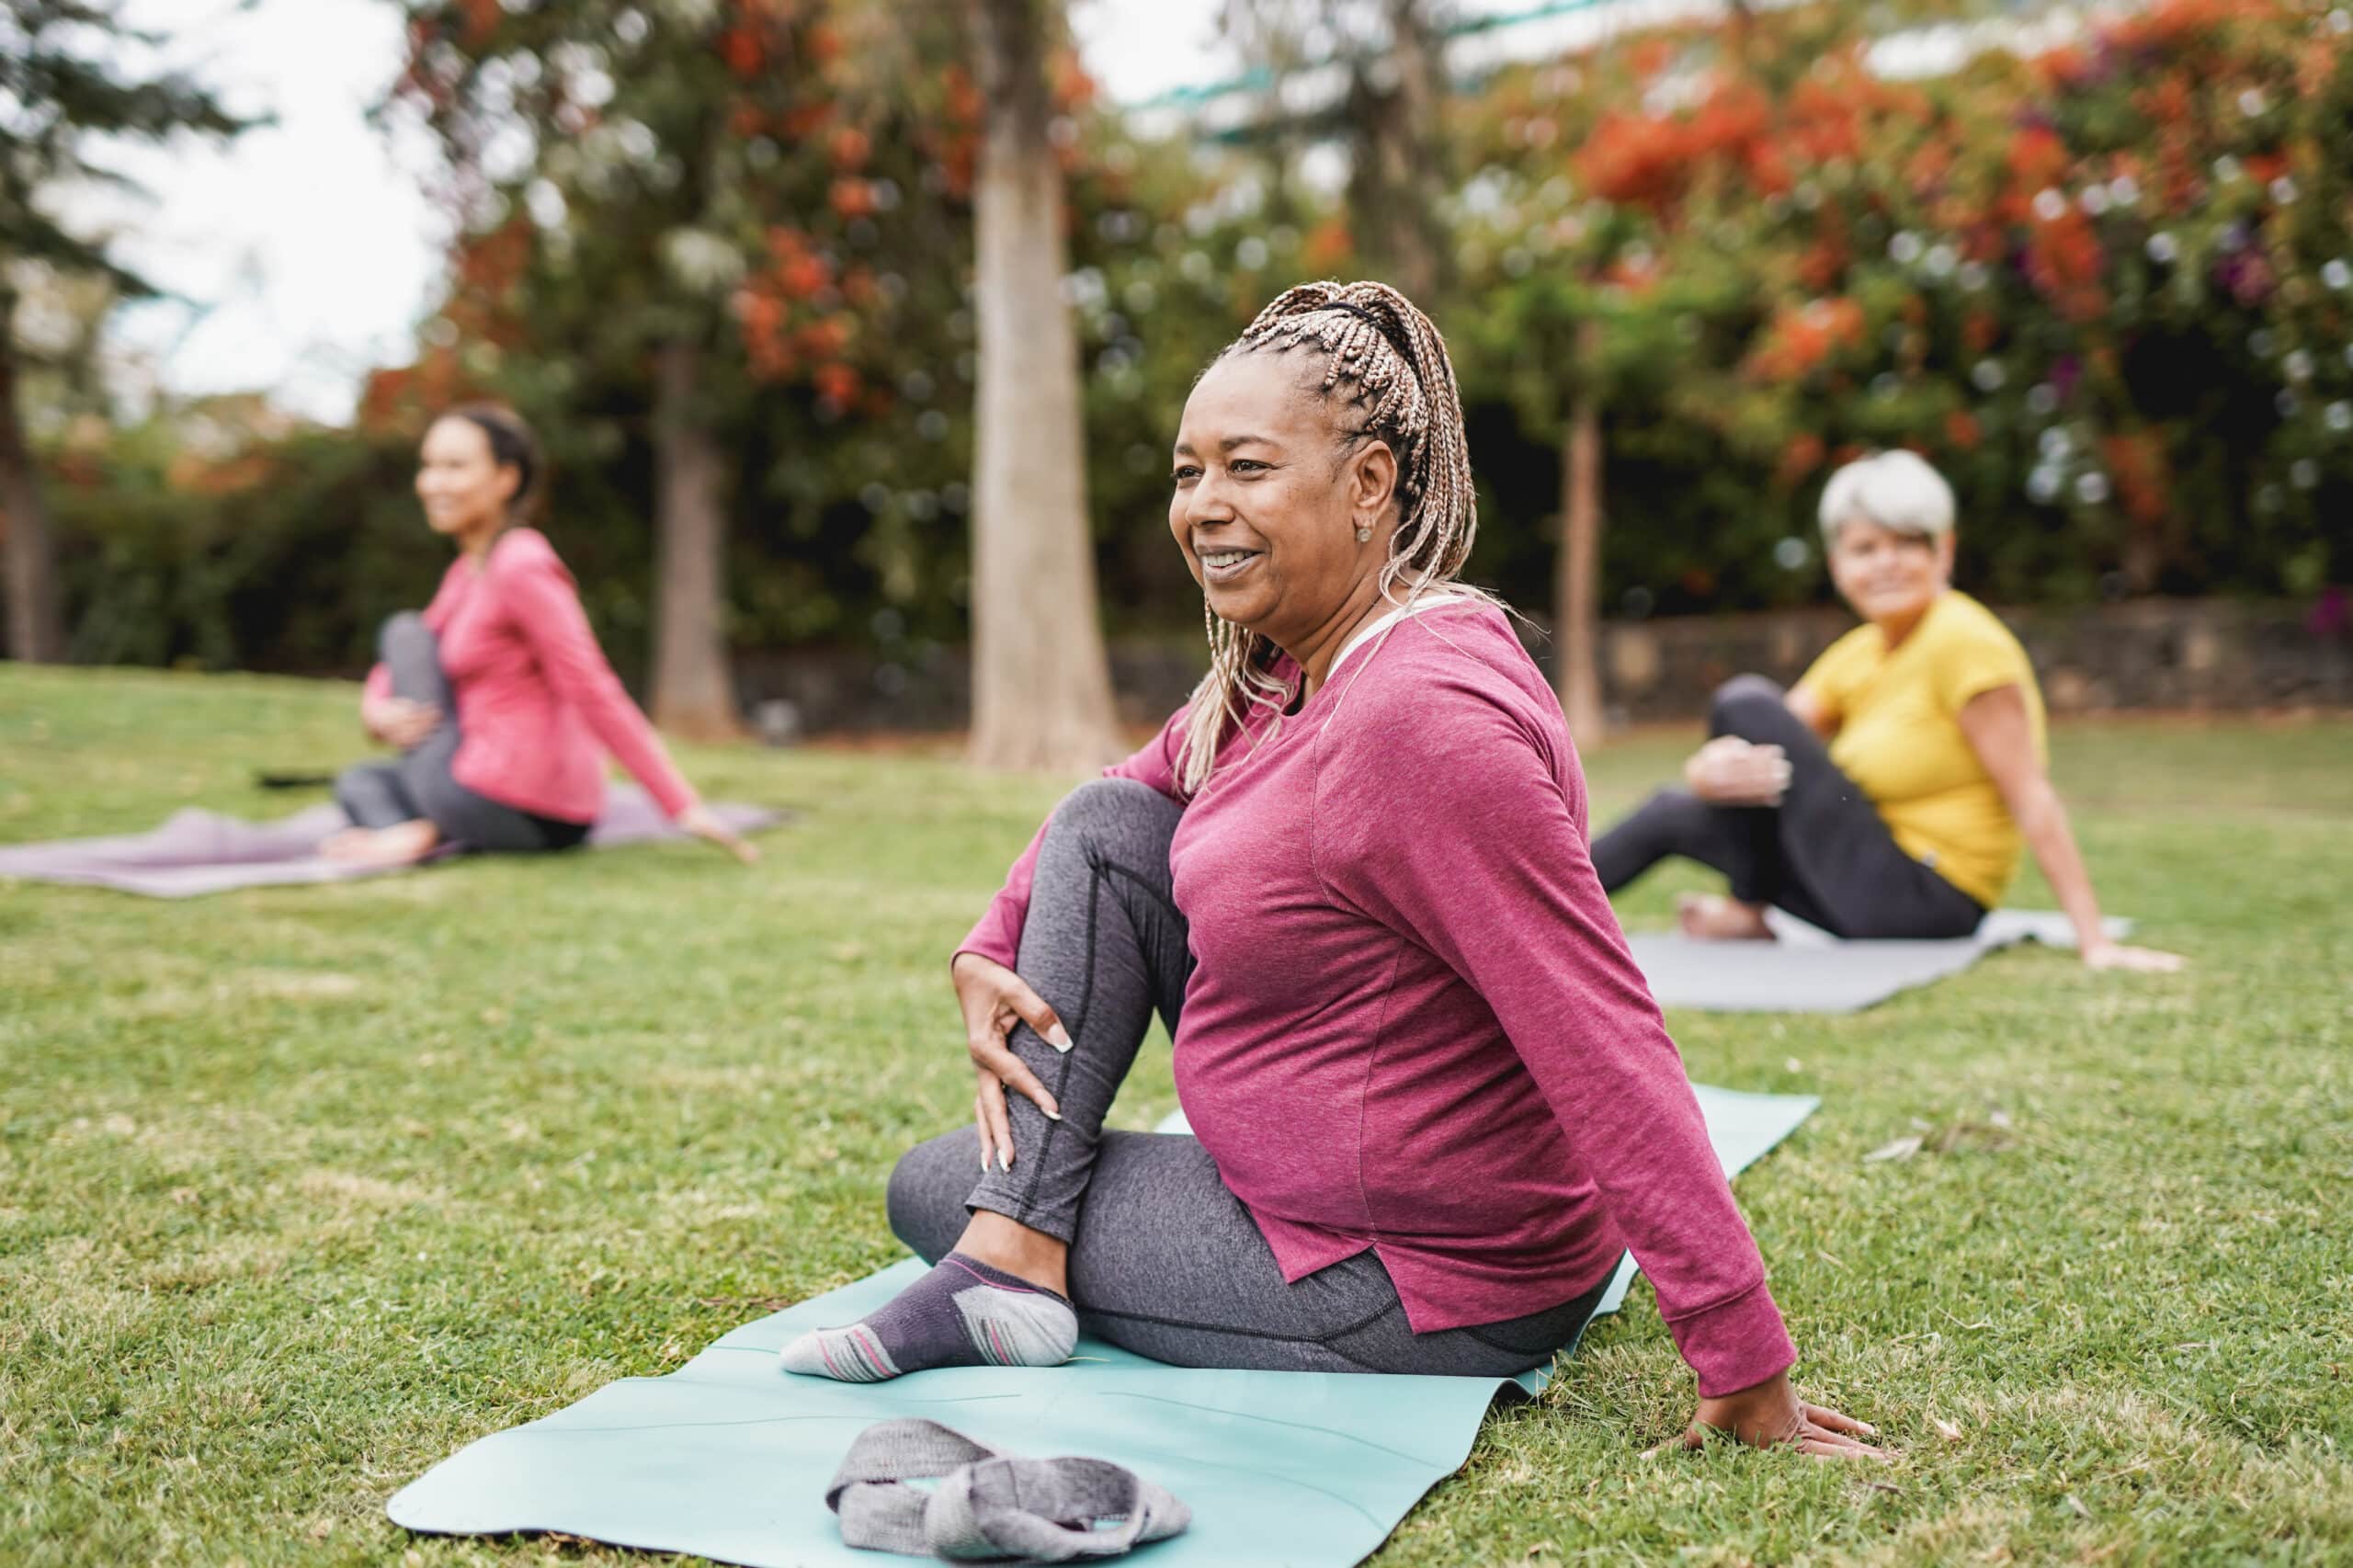 Three senior women participating in an outdoor yoga session outside their independent living facility.